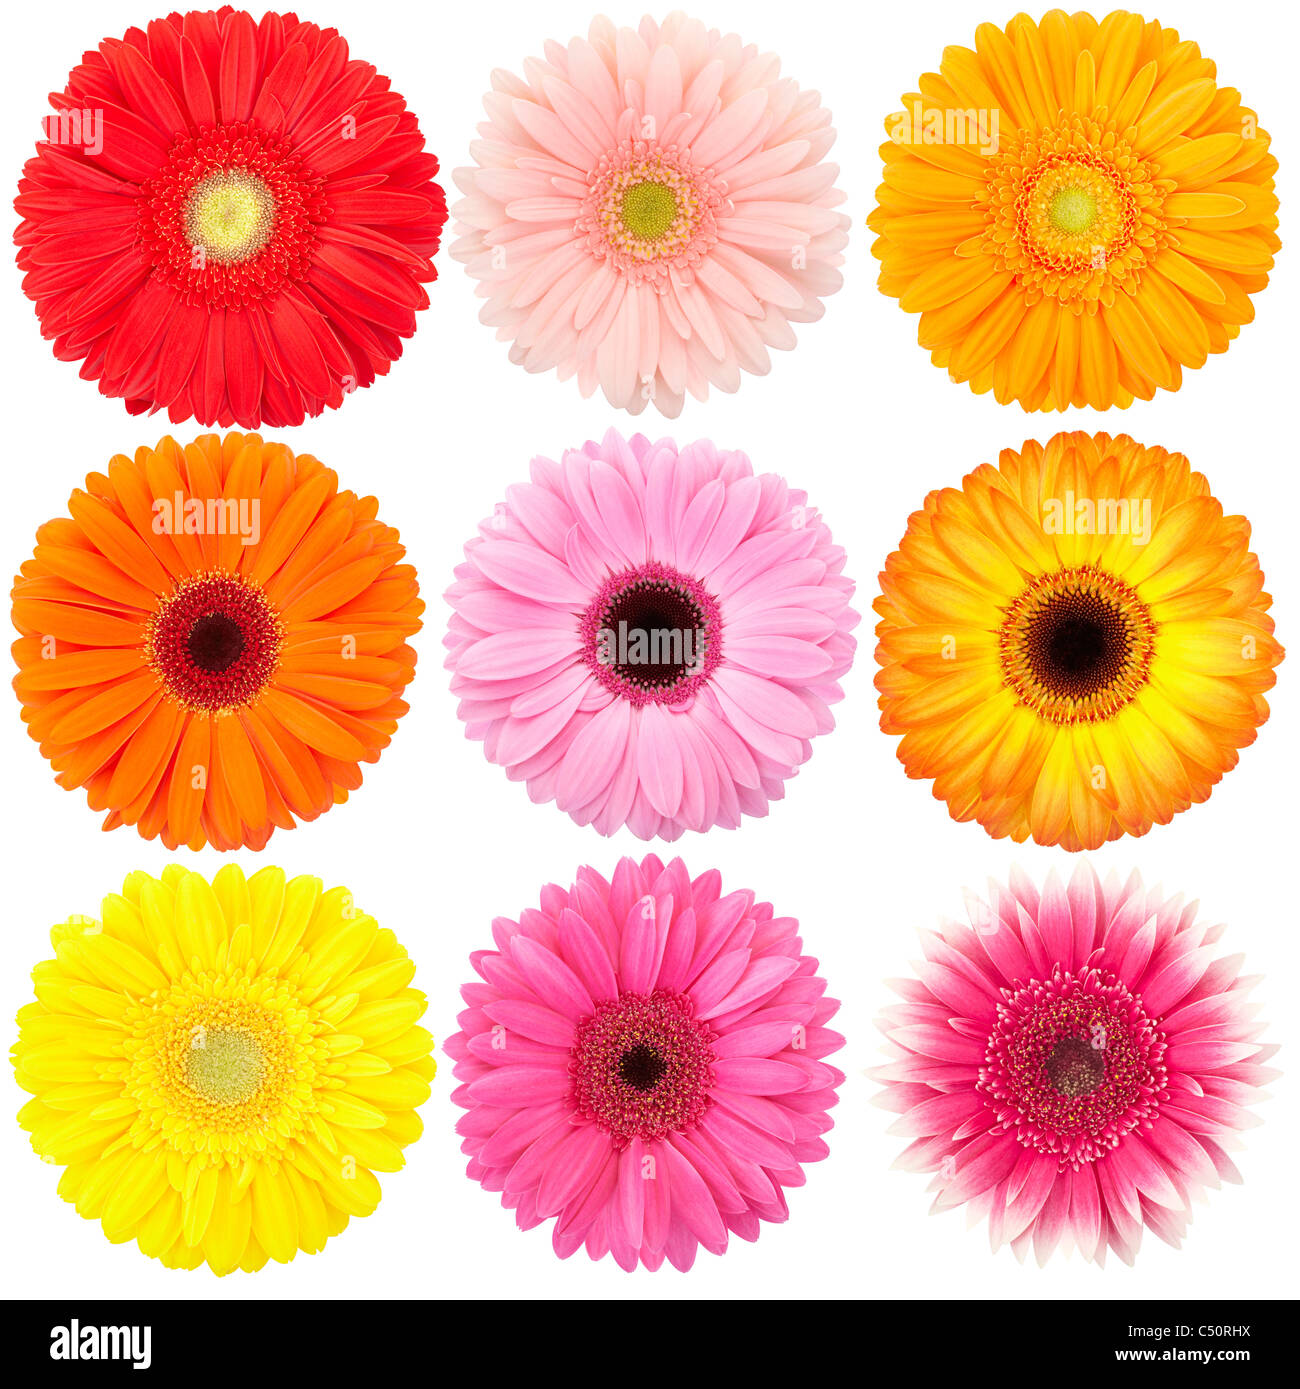 Fleur de gerber daisy collection isolated on white Banque D'Images